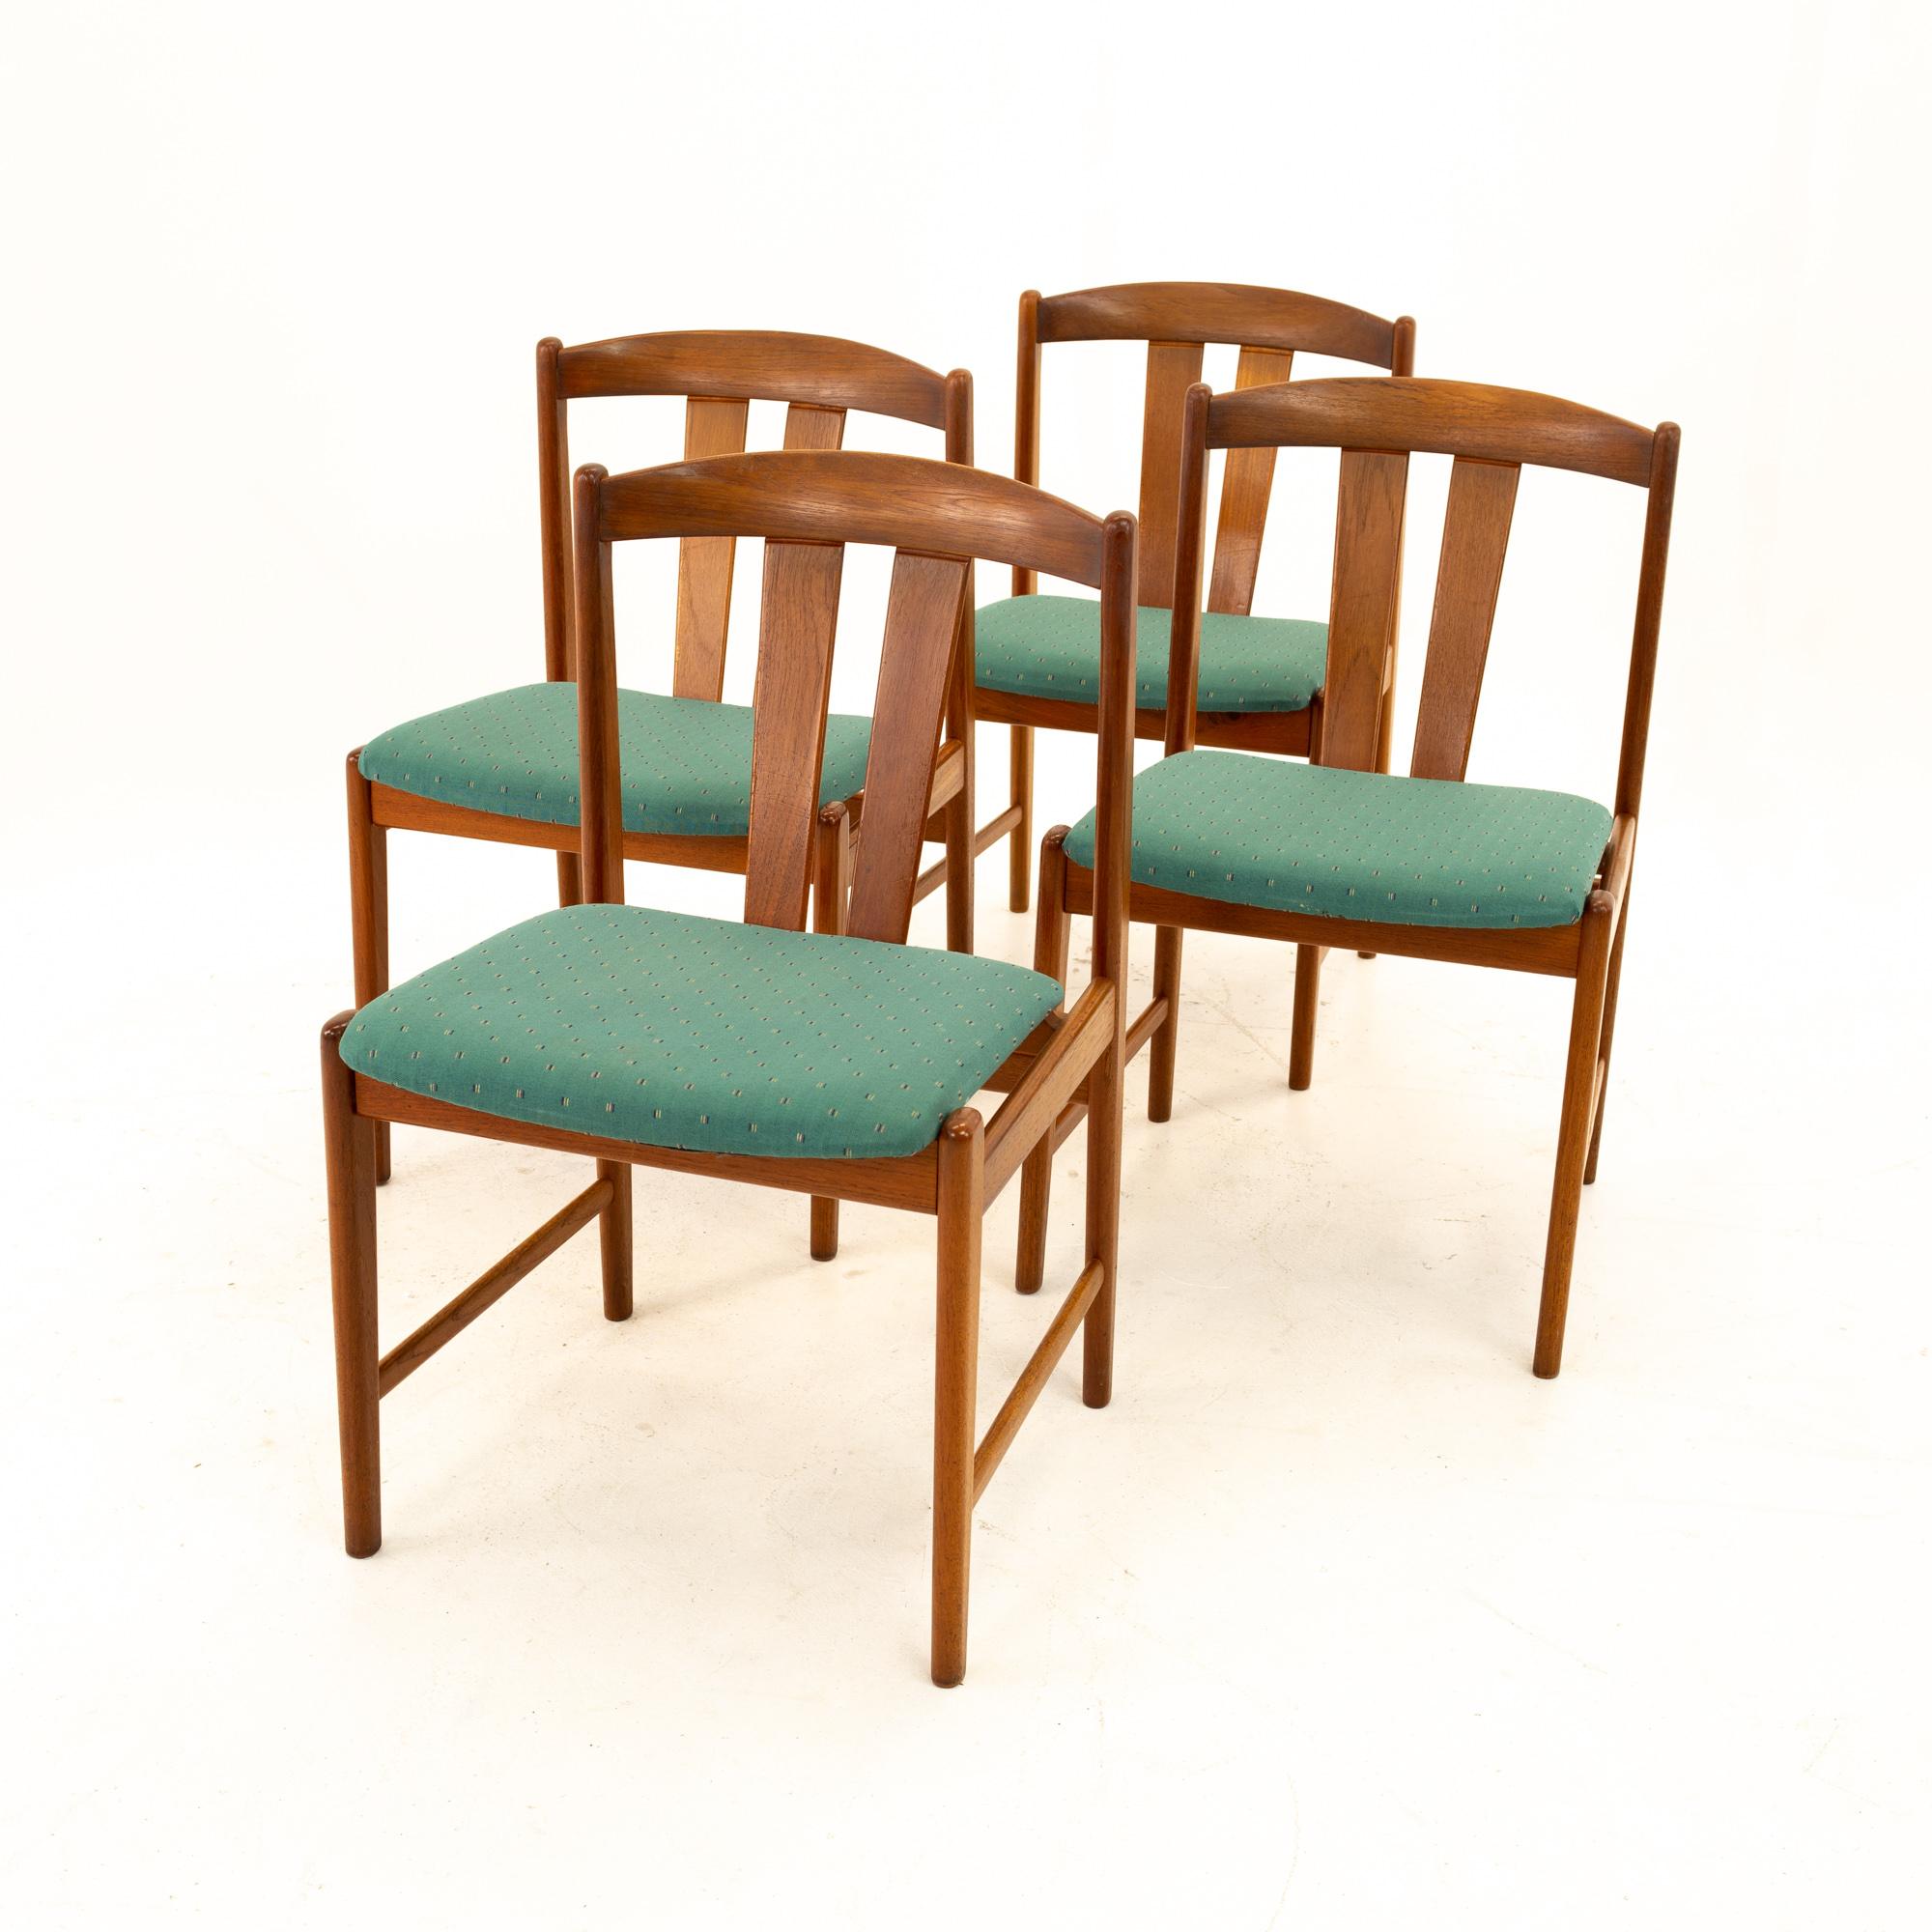 Mid Century teak dining chairs, set of 4
Each chair measures: 19.25 wide x 17.5 deep x 30.75 high with a seat height of 17.75 inches
This set is available in what we call restored vintage condition. Upon purchase, it is thoroughly cleaned and minor